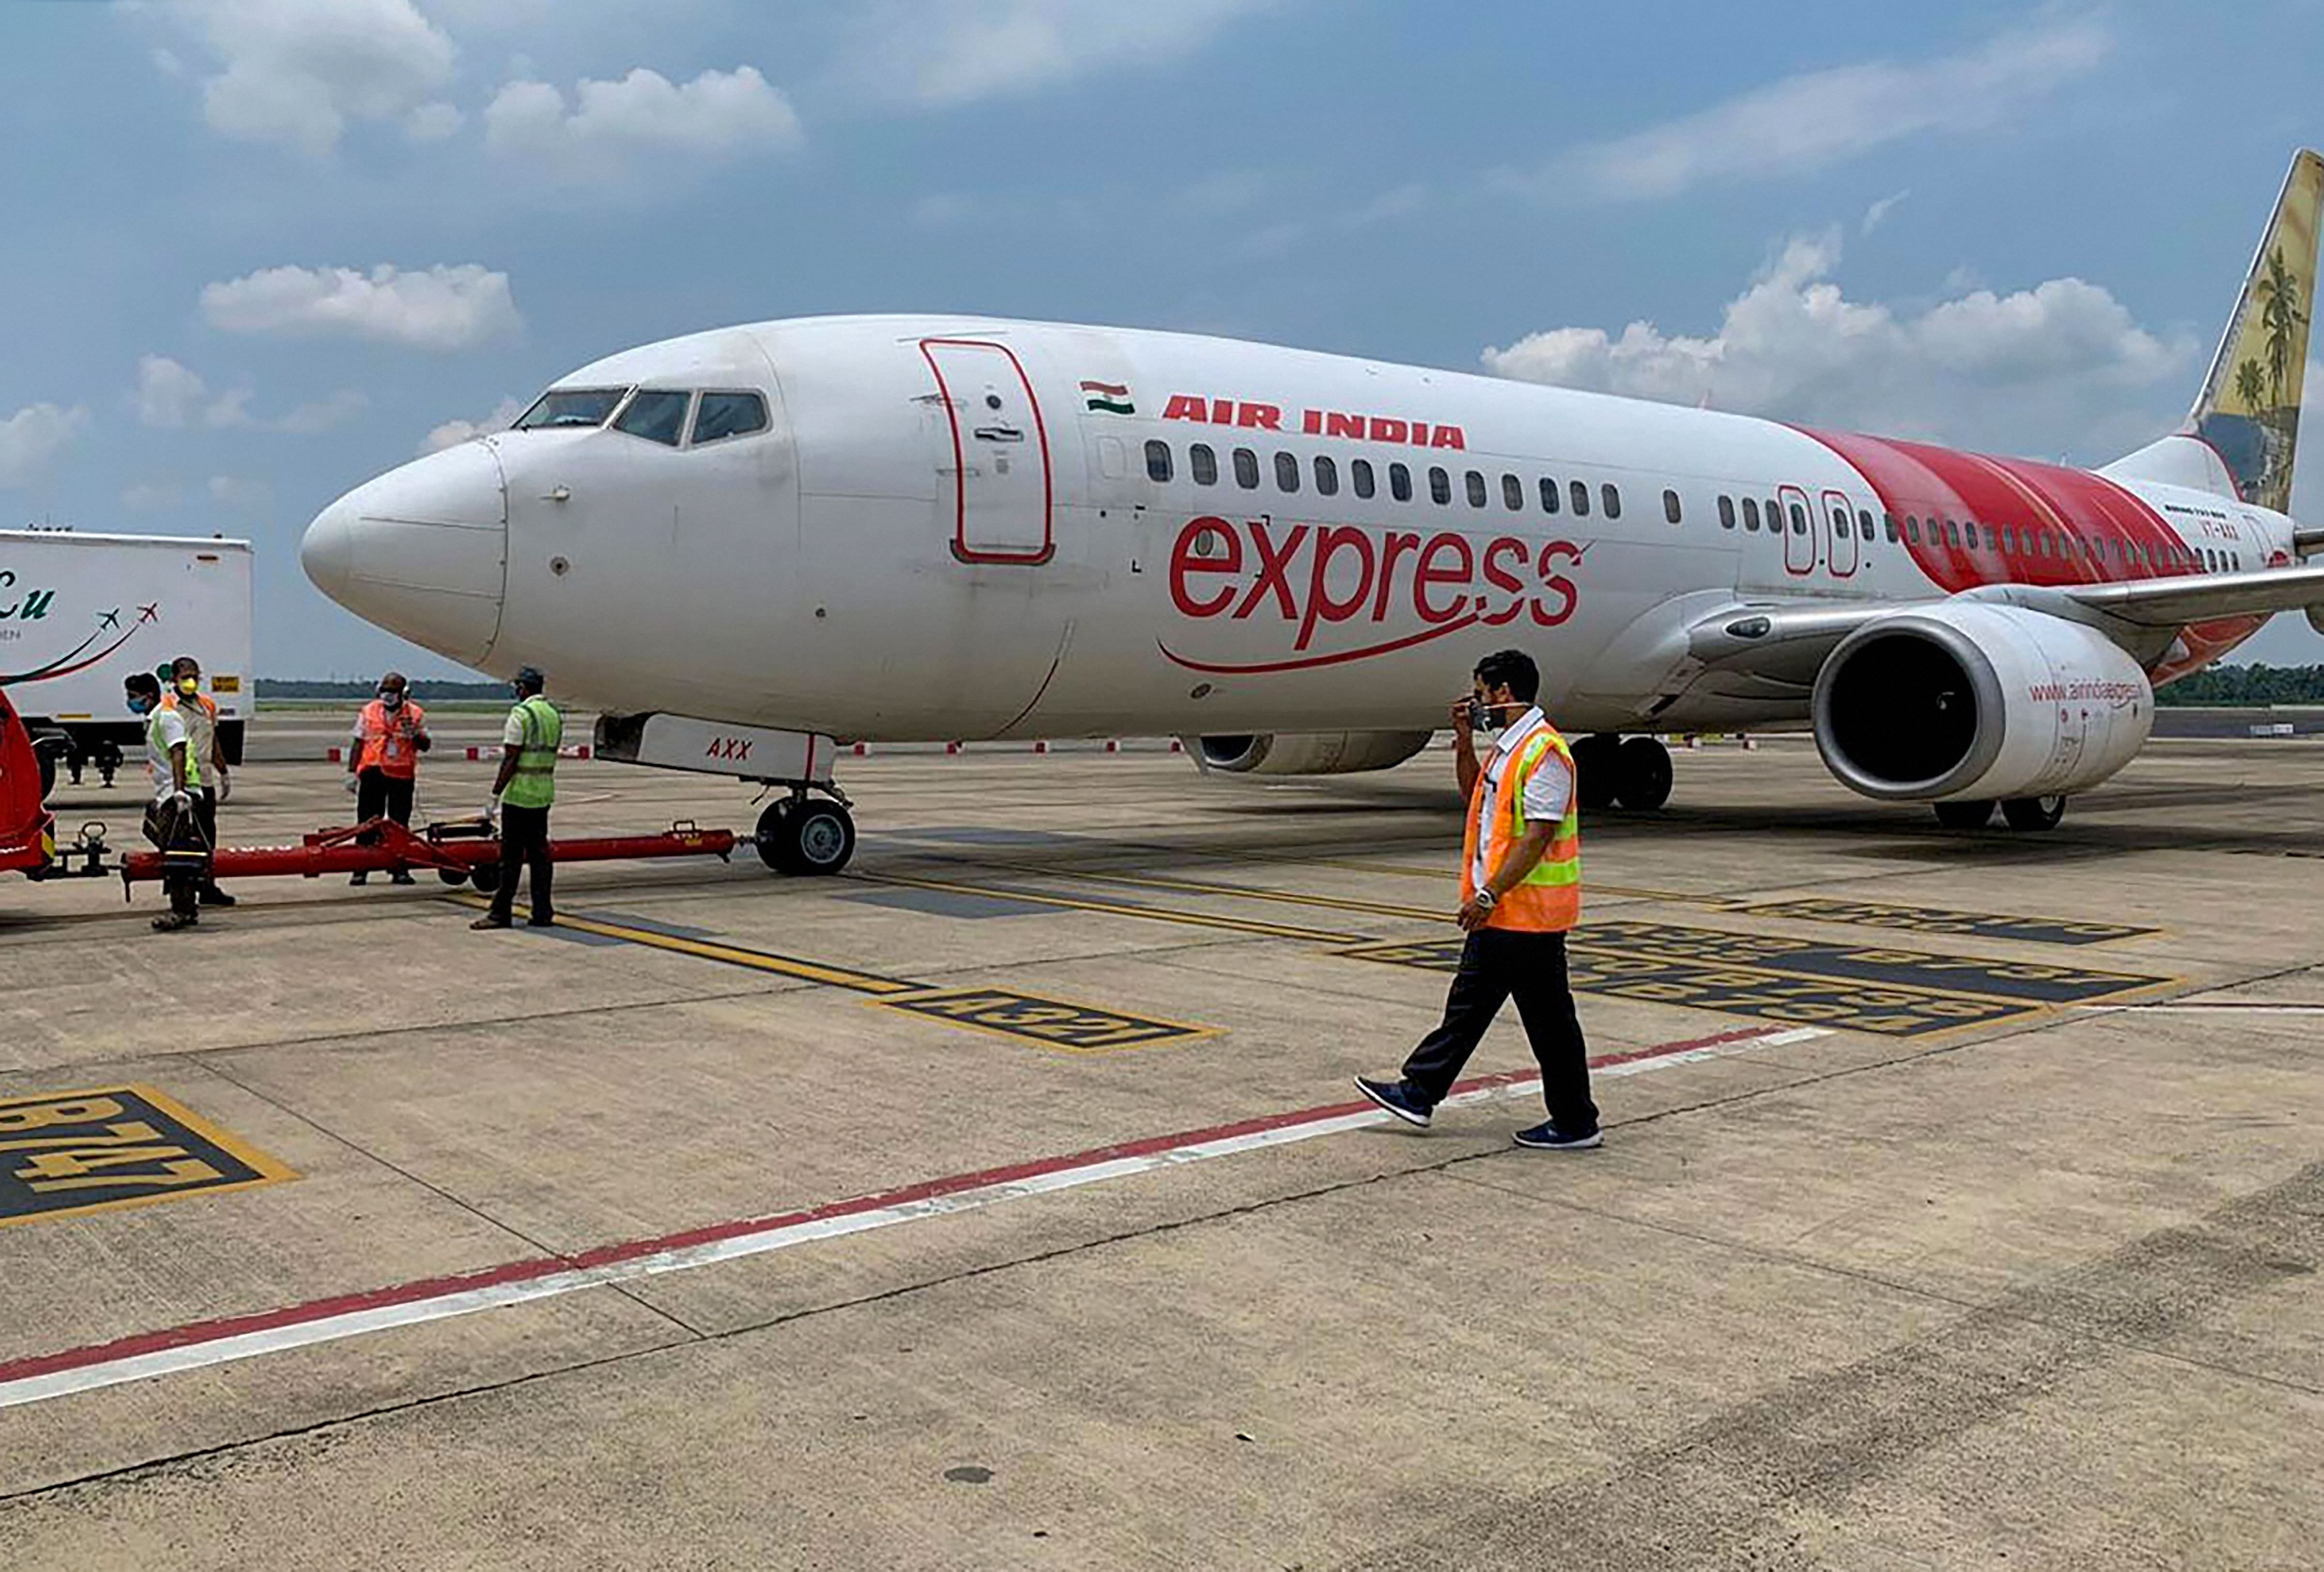 Air India Express will operate these flights as part of the Vande Bharat Mission to south Indian cities from Sharjah, according to the Indian Consulate in Dubai. Representative image/Credit: PTI Photo